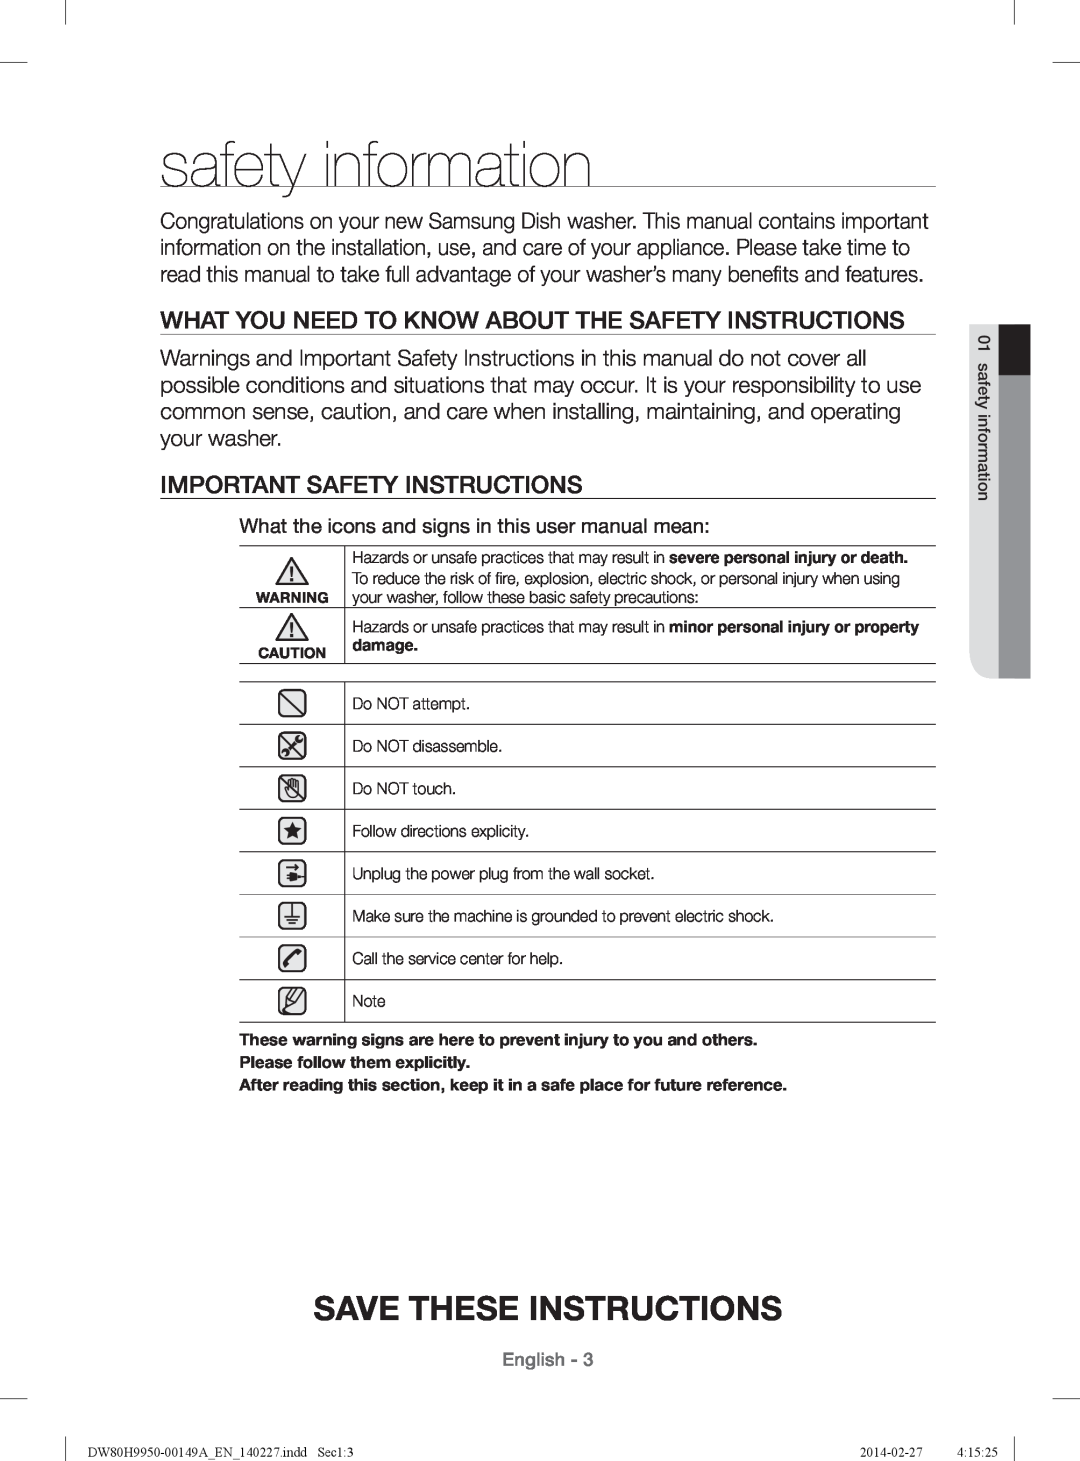 Samsung DW80H9930US safety information, Save These Instructions, What You Need To Know About The Safety Instructions 